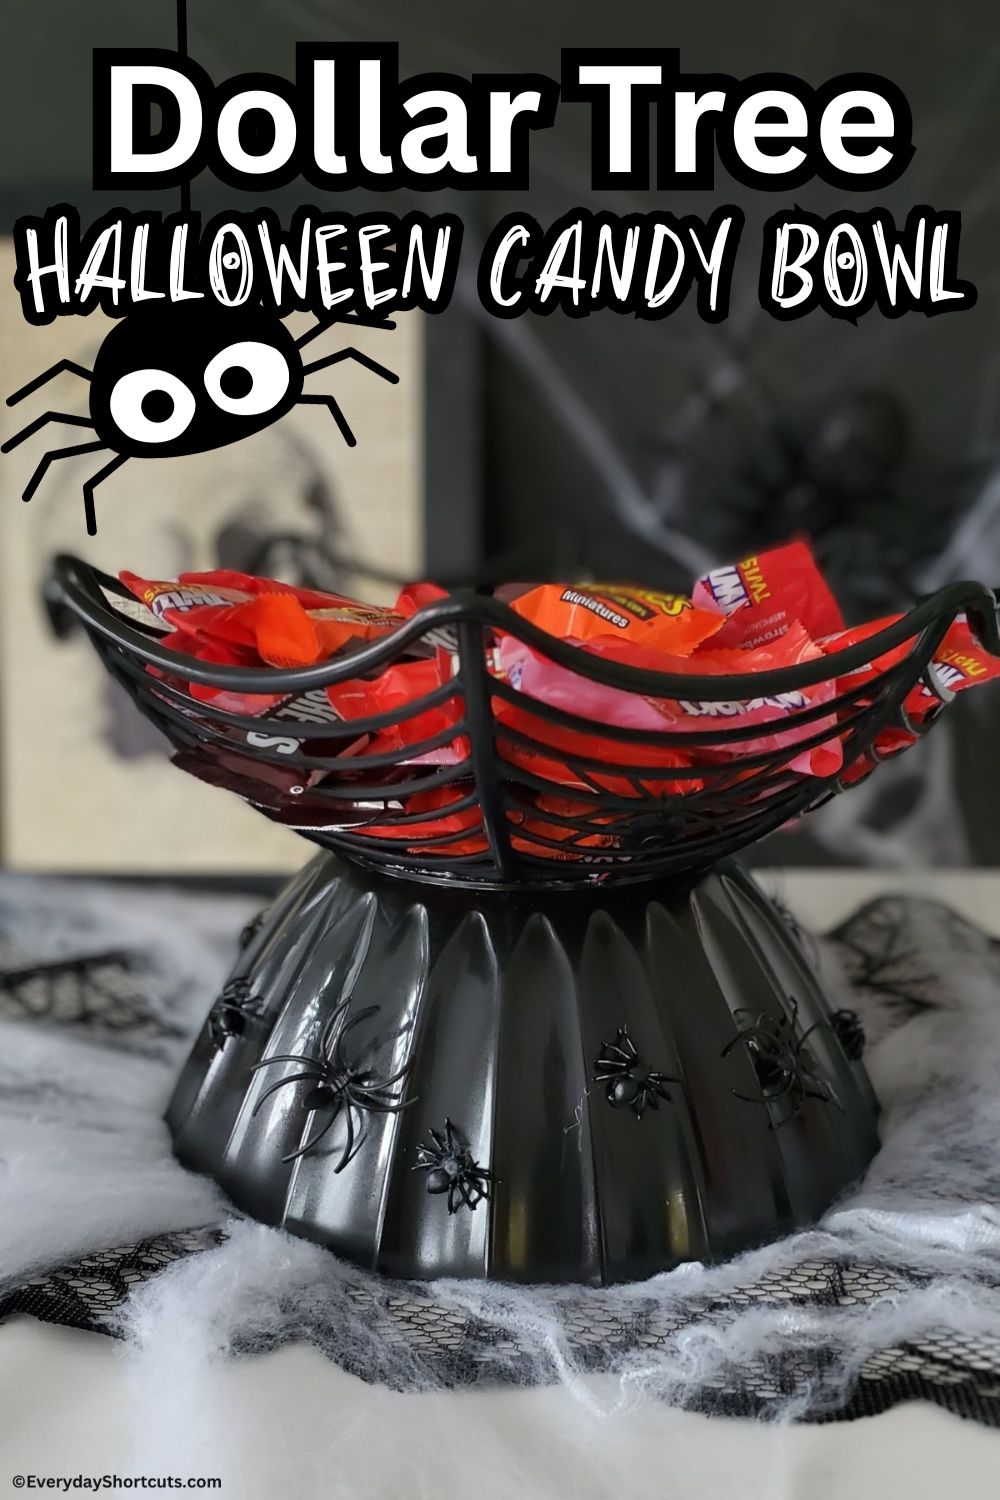 dollar tree Halloween bowl craft filled with Halloween candy